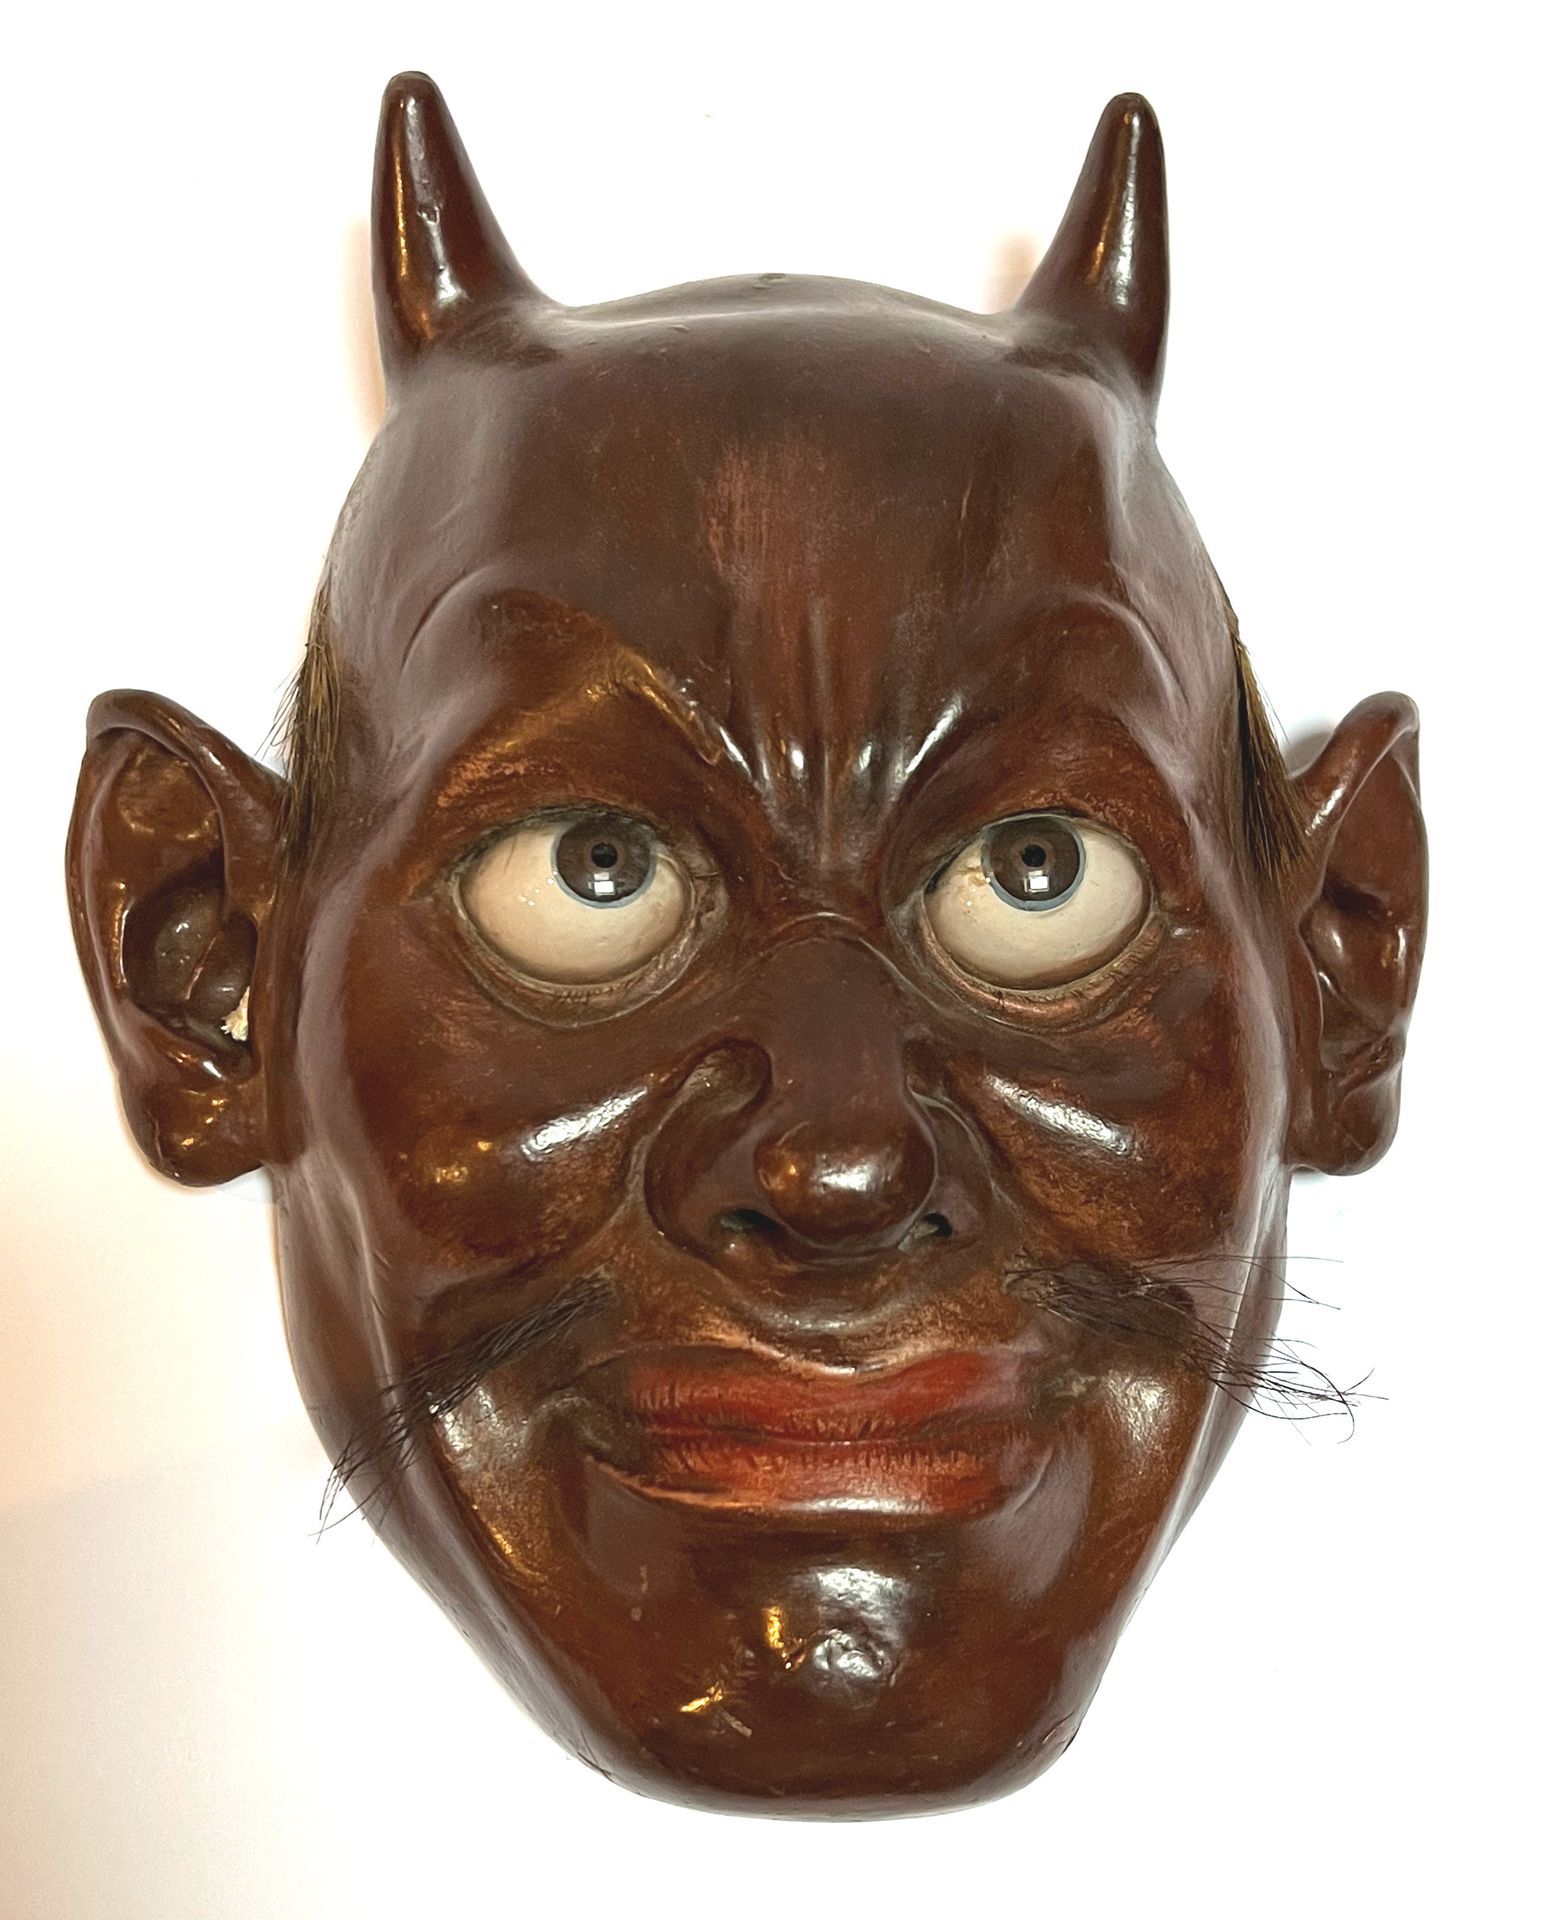 Null JAPAN, No theater mask, Meiji period, H: 24 cm

Lot exhibited in the house &hellip;